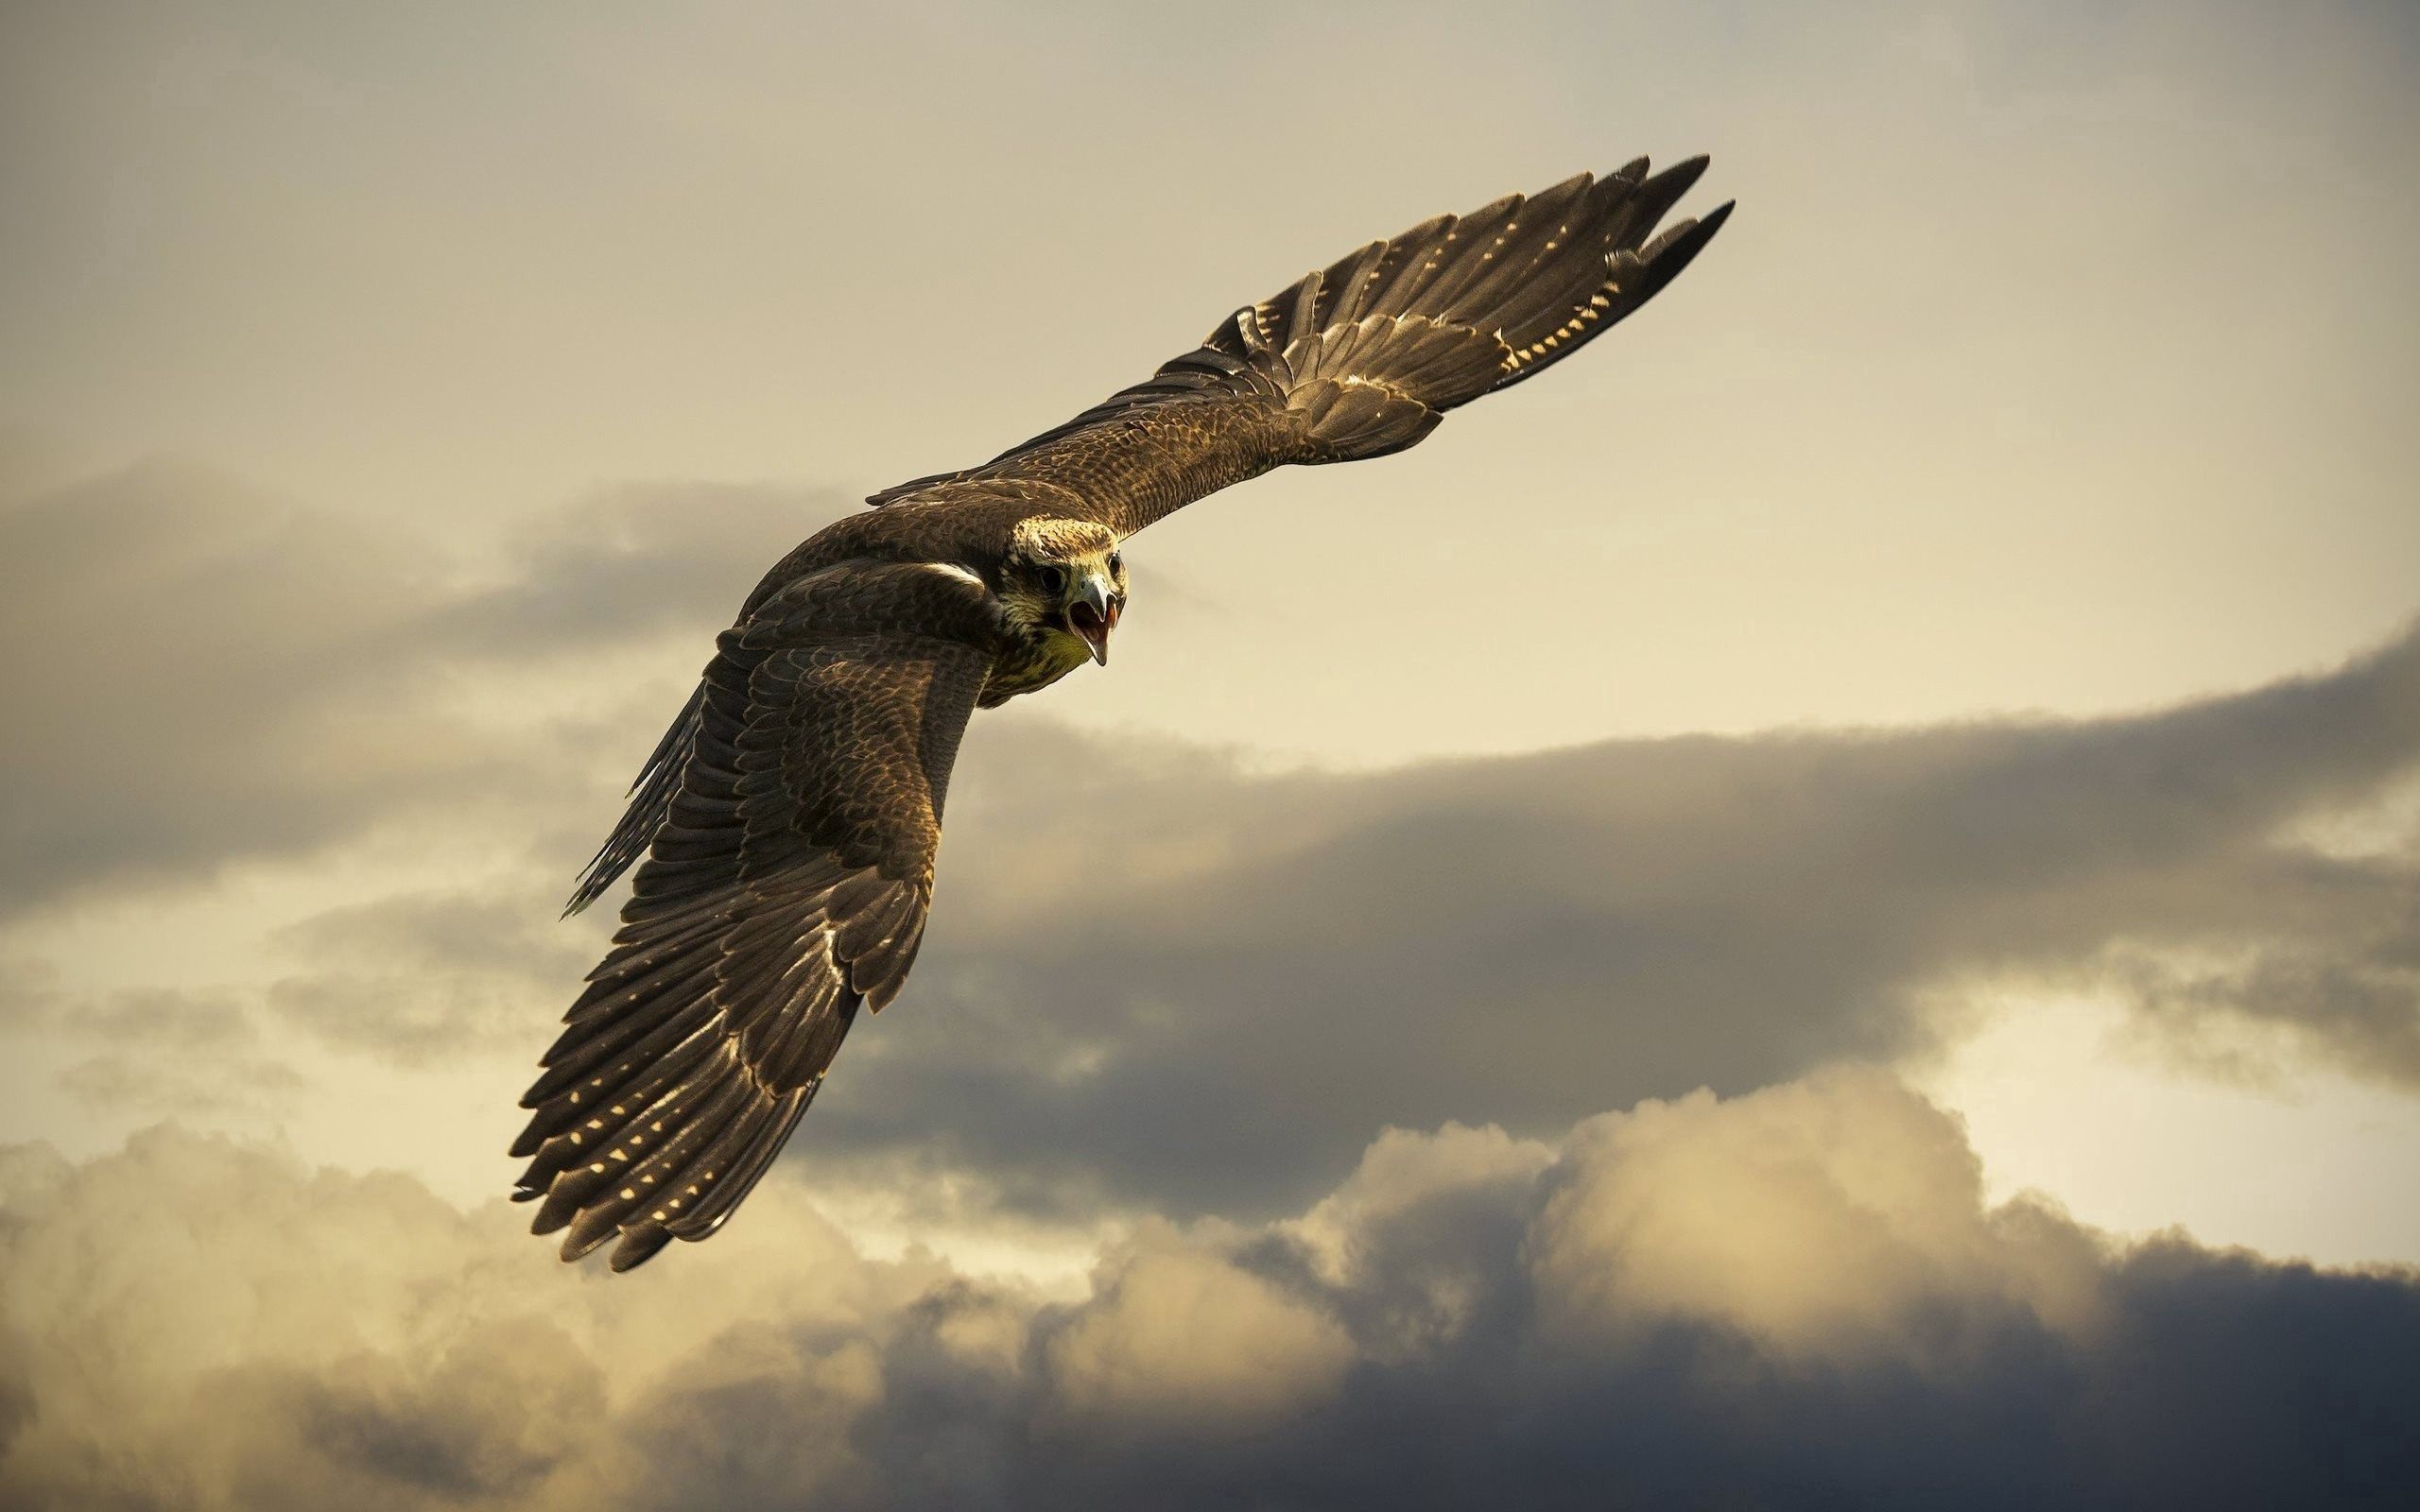 150756 download wallpaper animals, flight, sky, clouds, wings, eagle screensavers and pictures for free